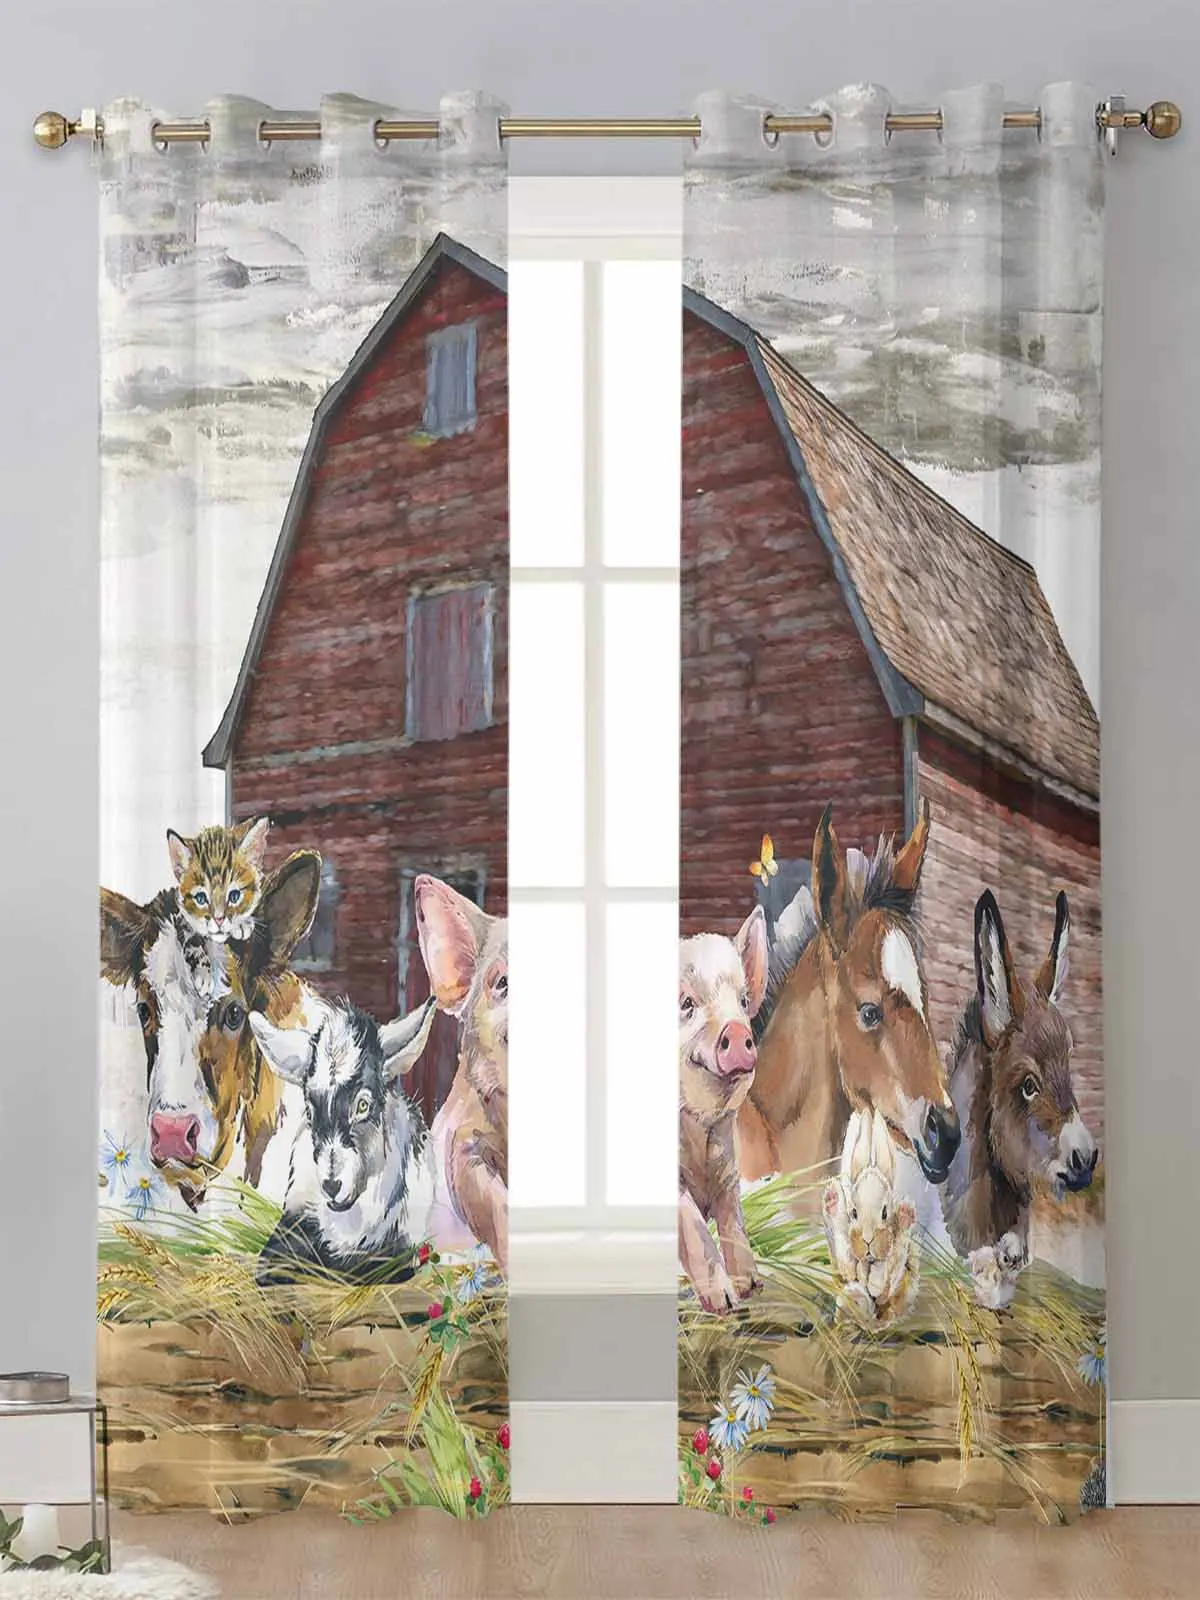 

Farm Barn Cow Pig Sheer Curtains For Living Room Window Screening Transparent Voile Tulle Curtain Cortinas Drapes Home Decor